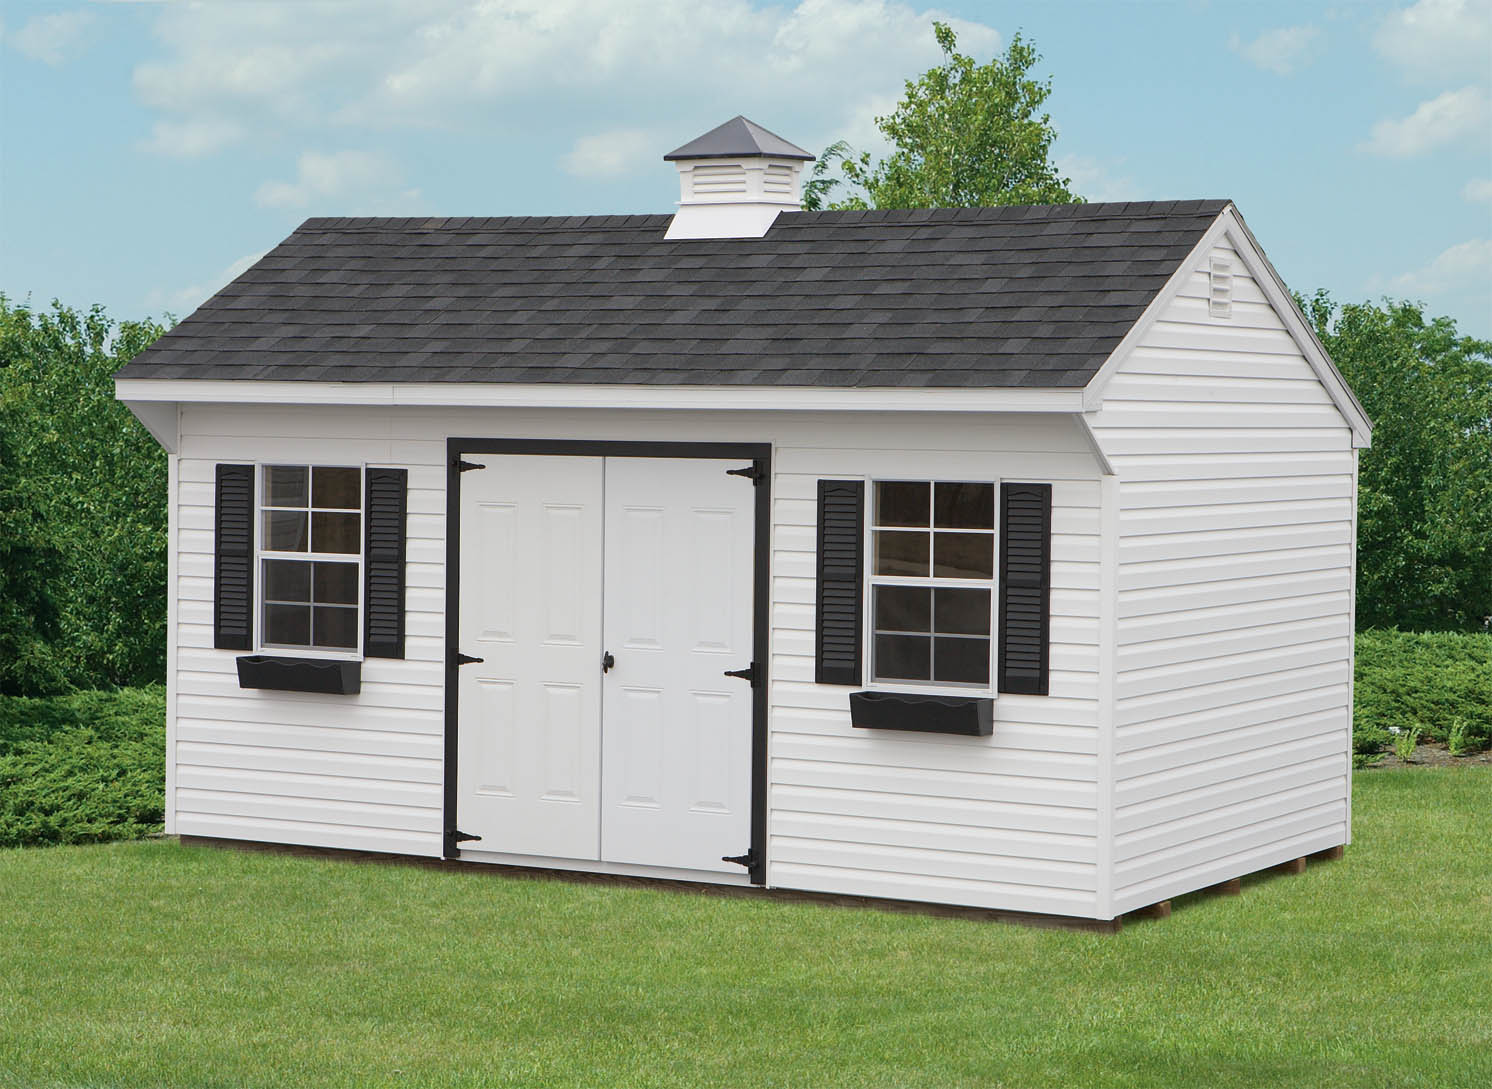 Plans For A Quaker Shed - How to learn DIY building Shed Blueprints 